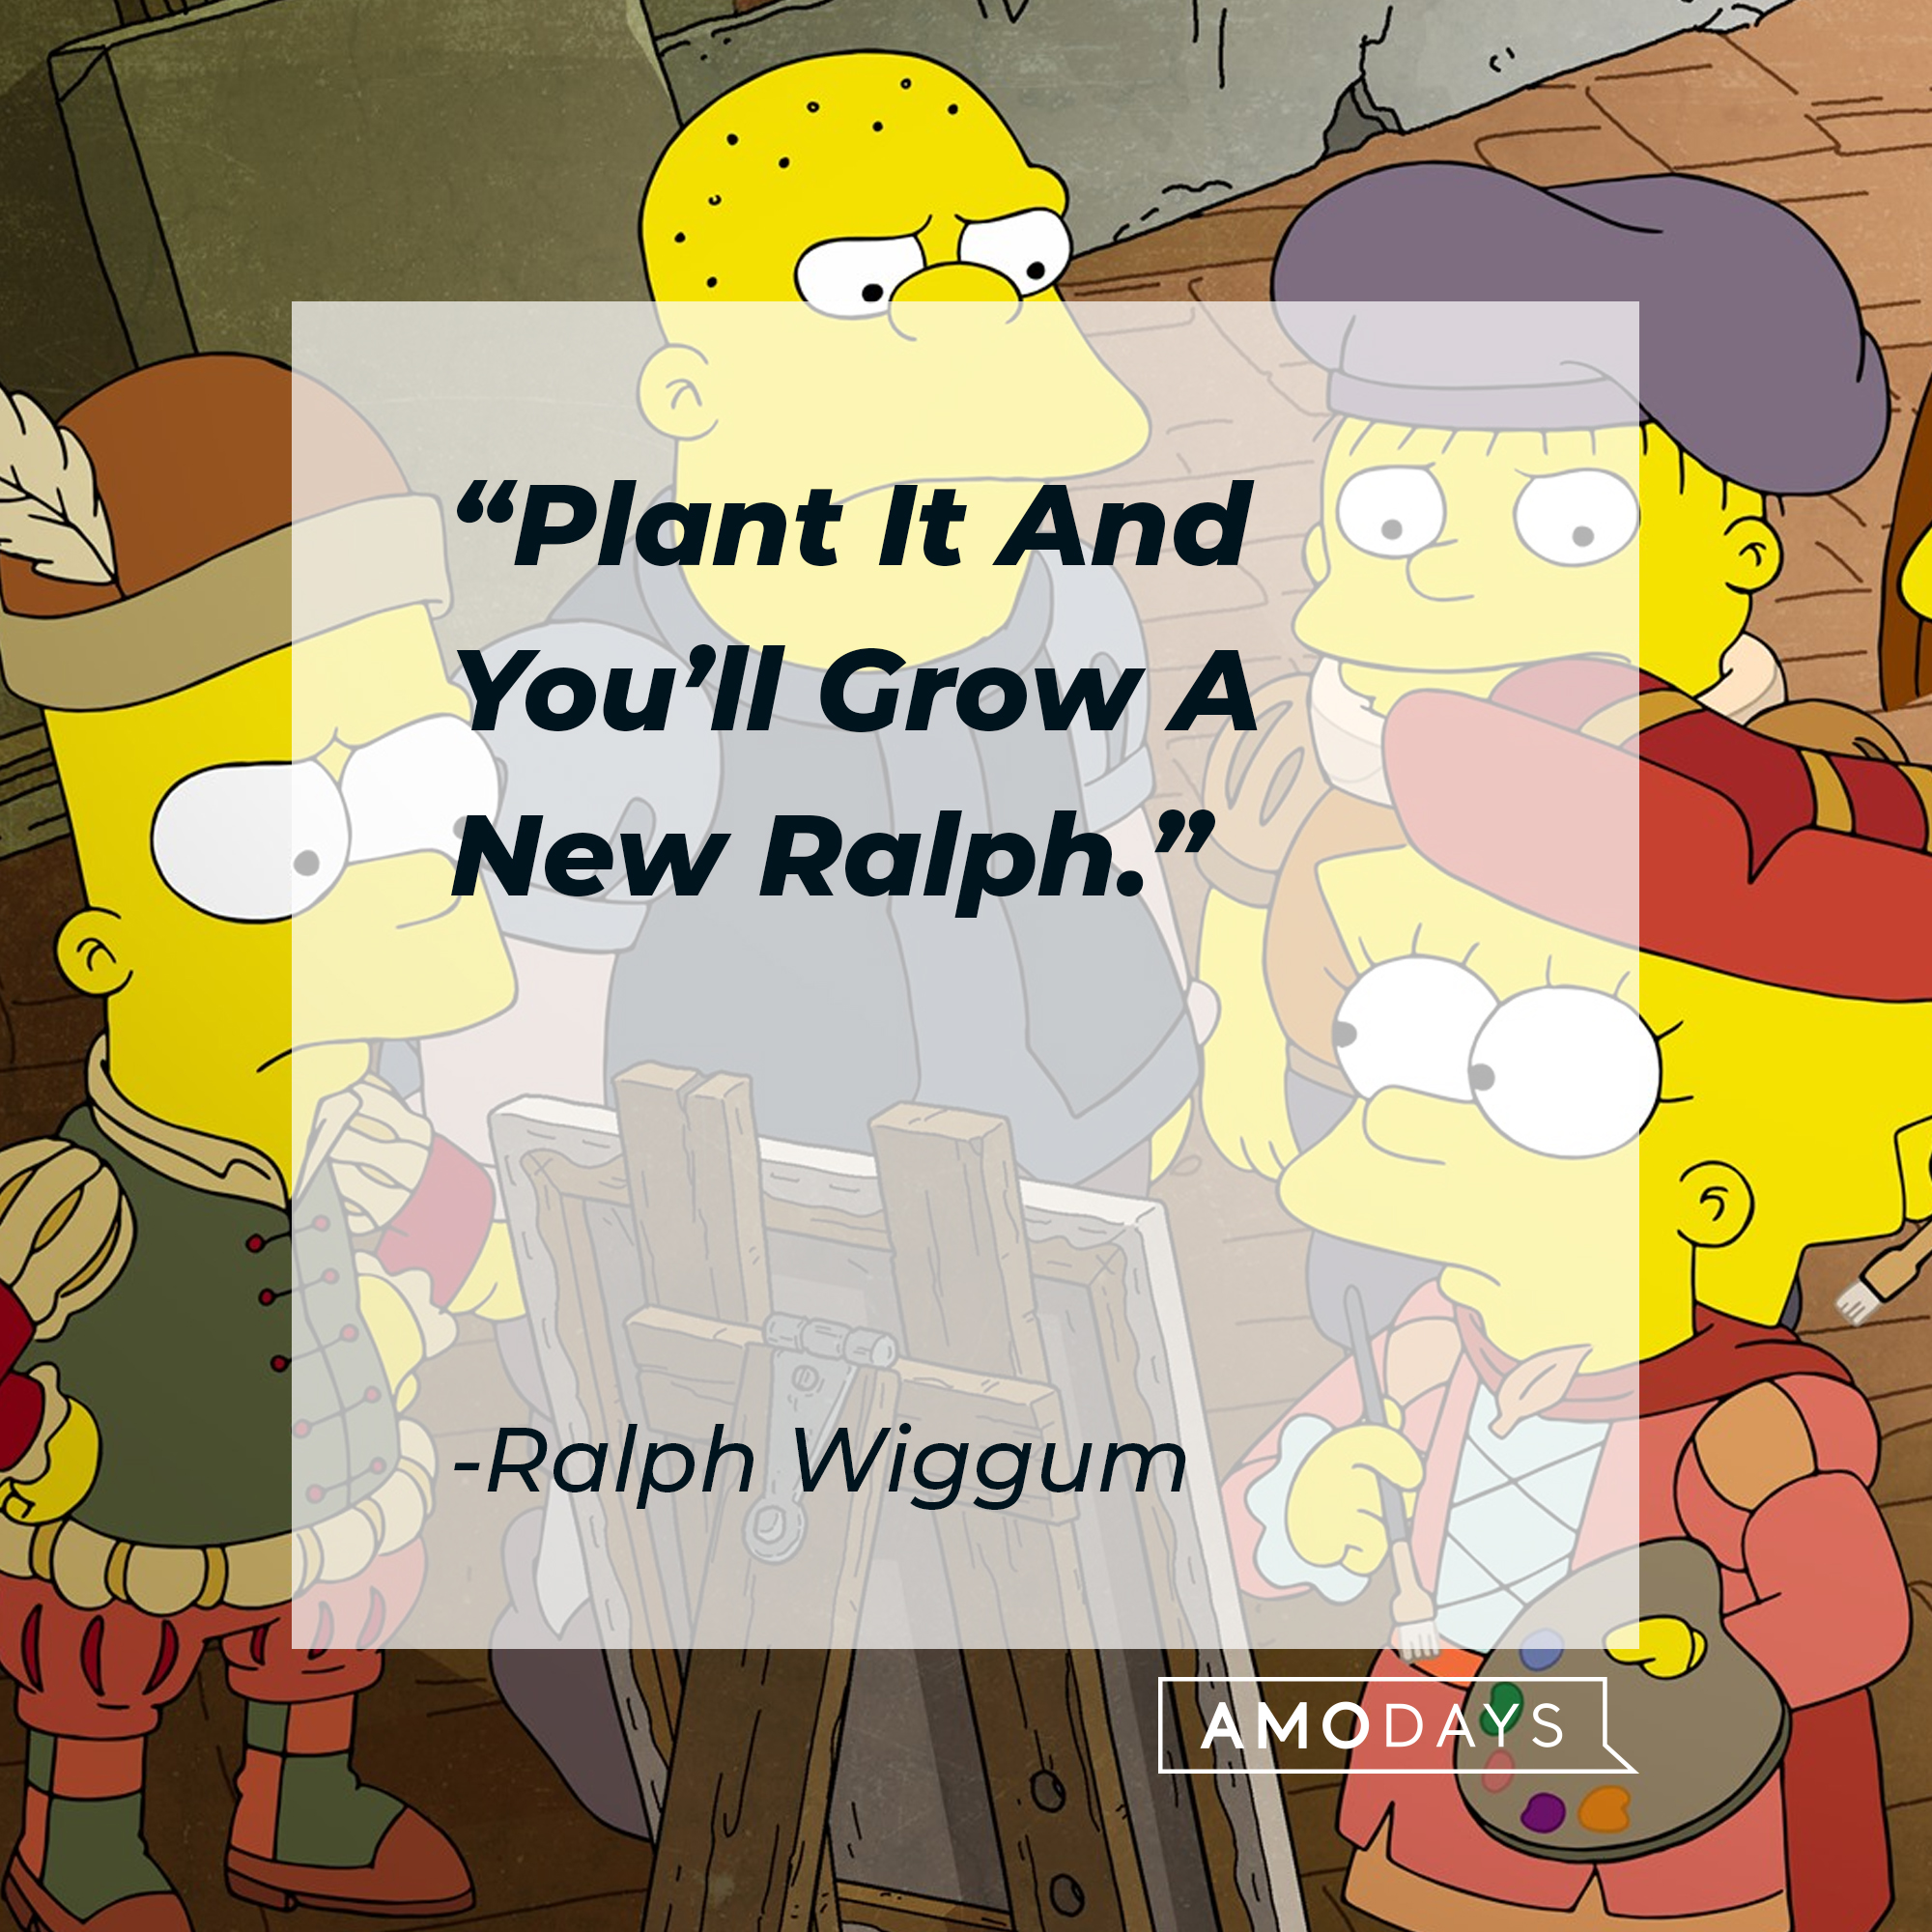 Ralph Wiggum's quote: "Plant It And You'll Grow A New Ralph."| Source: facebook.com/TheSimpsons